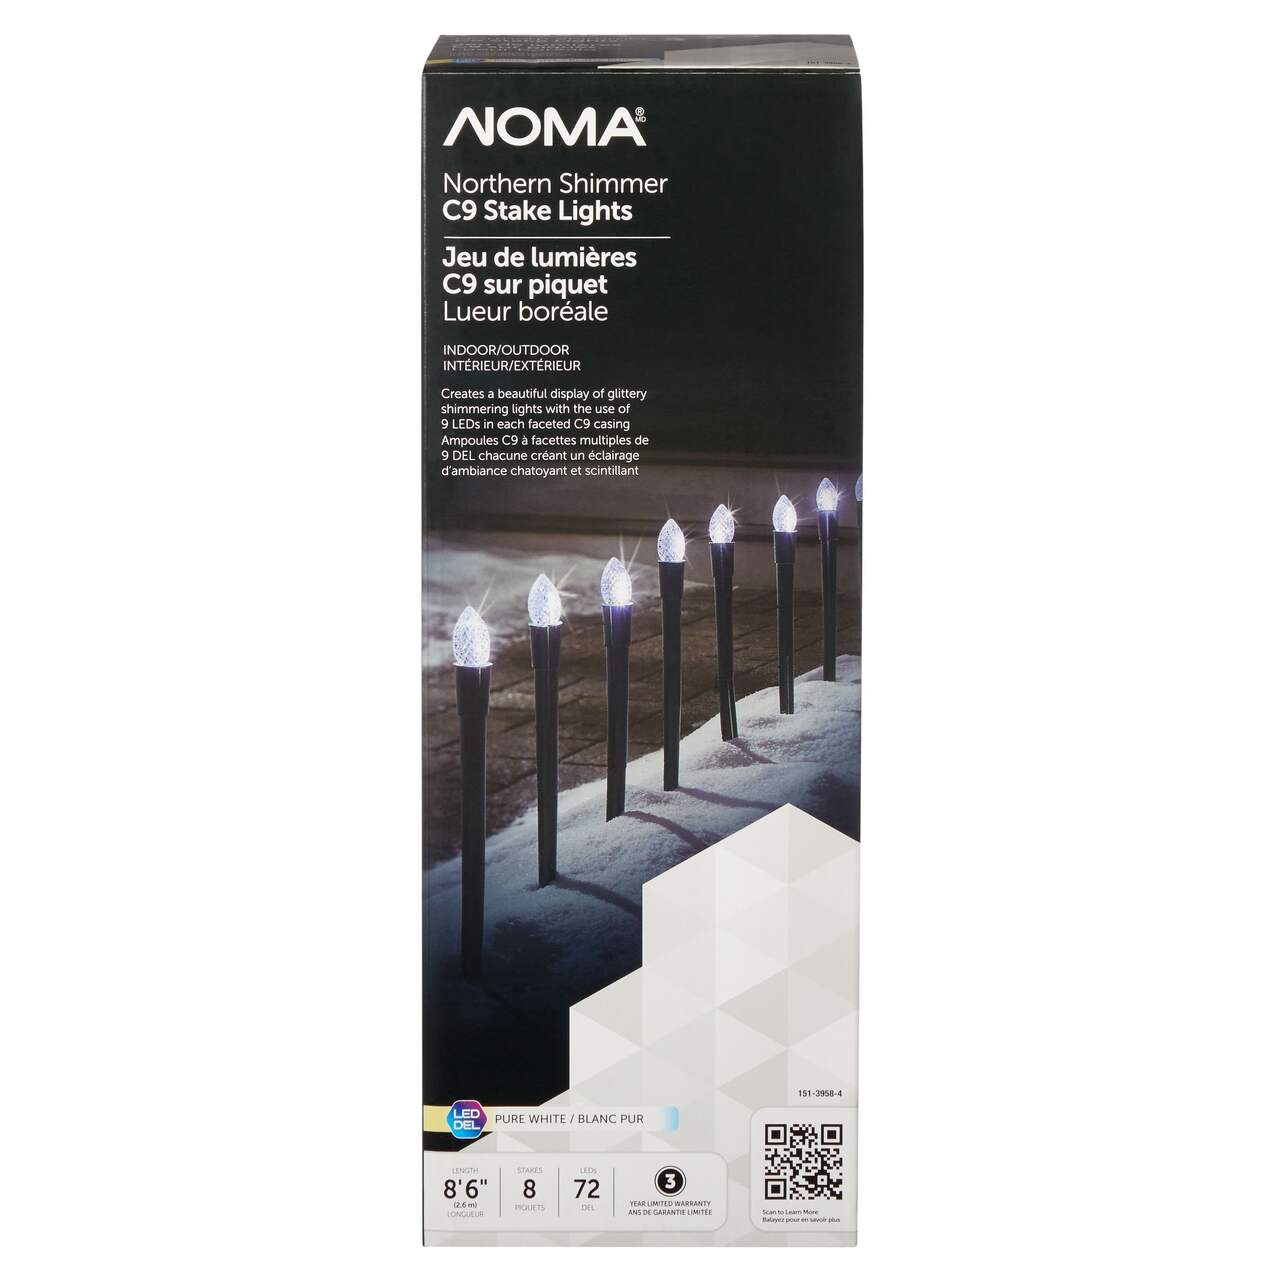 NOMA Northern Shimmer 8 Stake Lights, Pure White